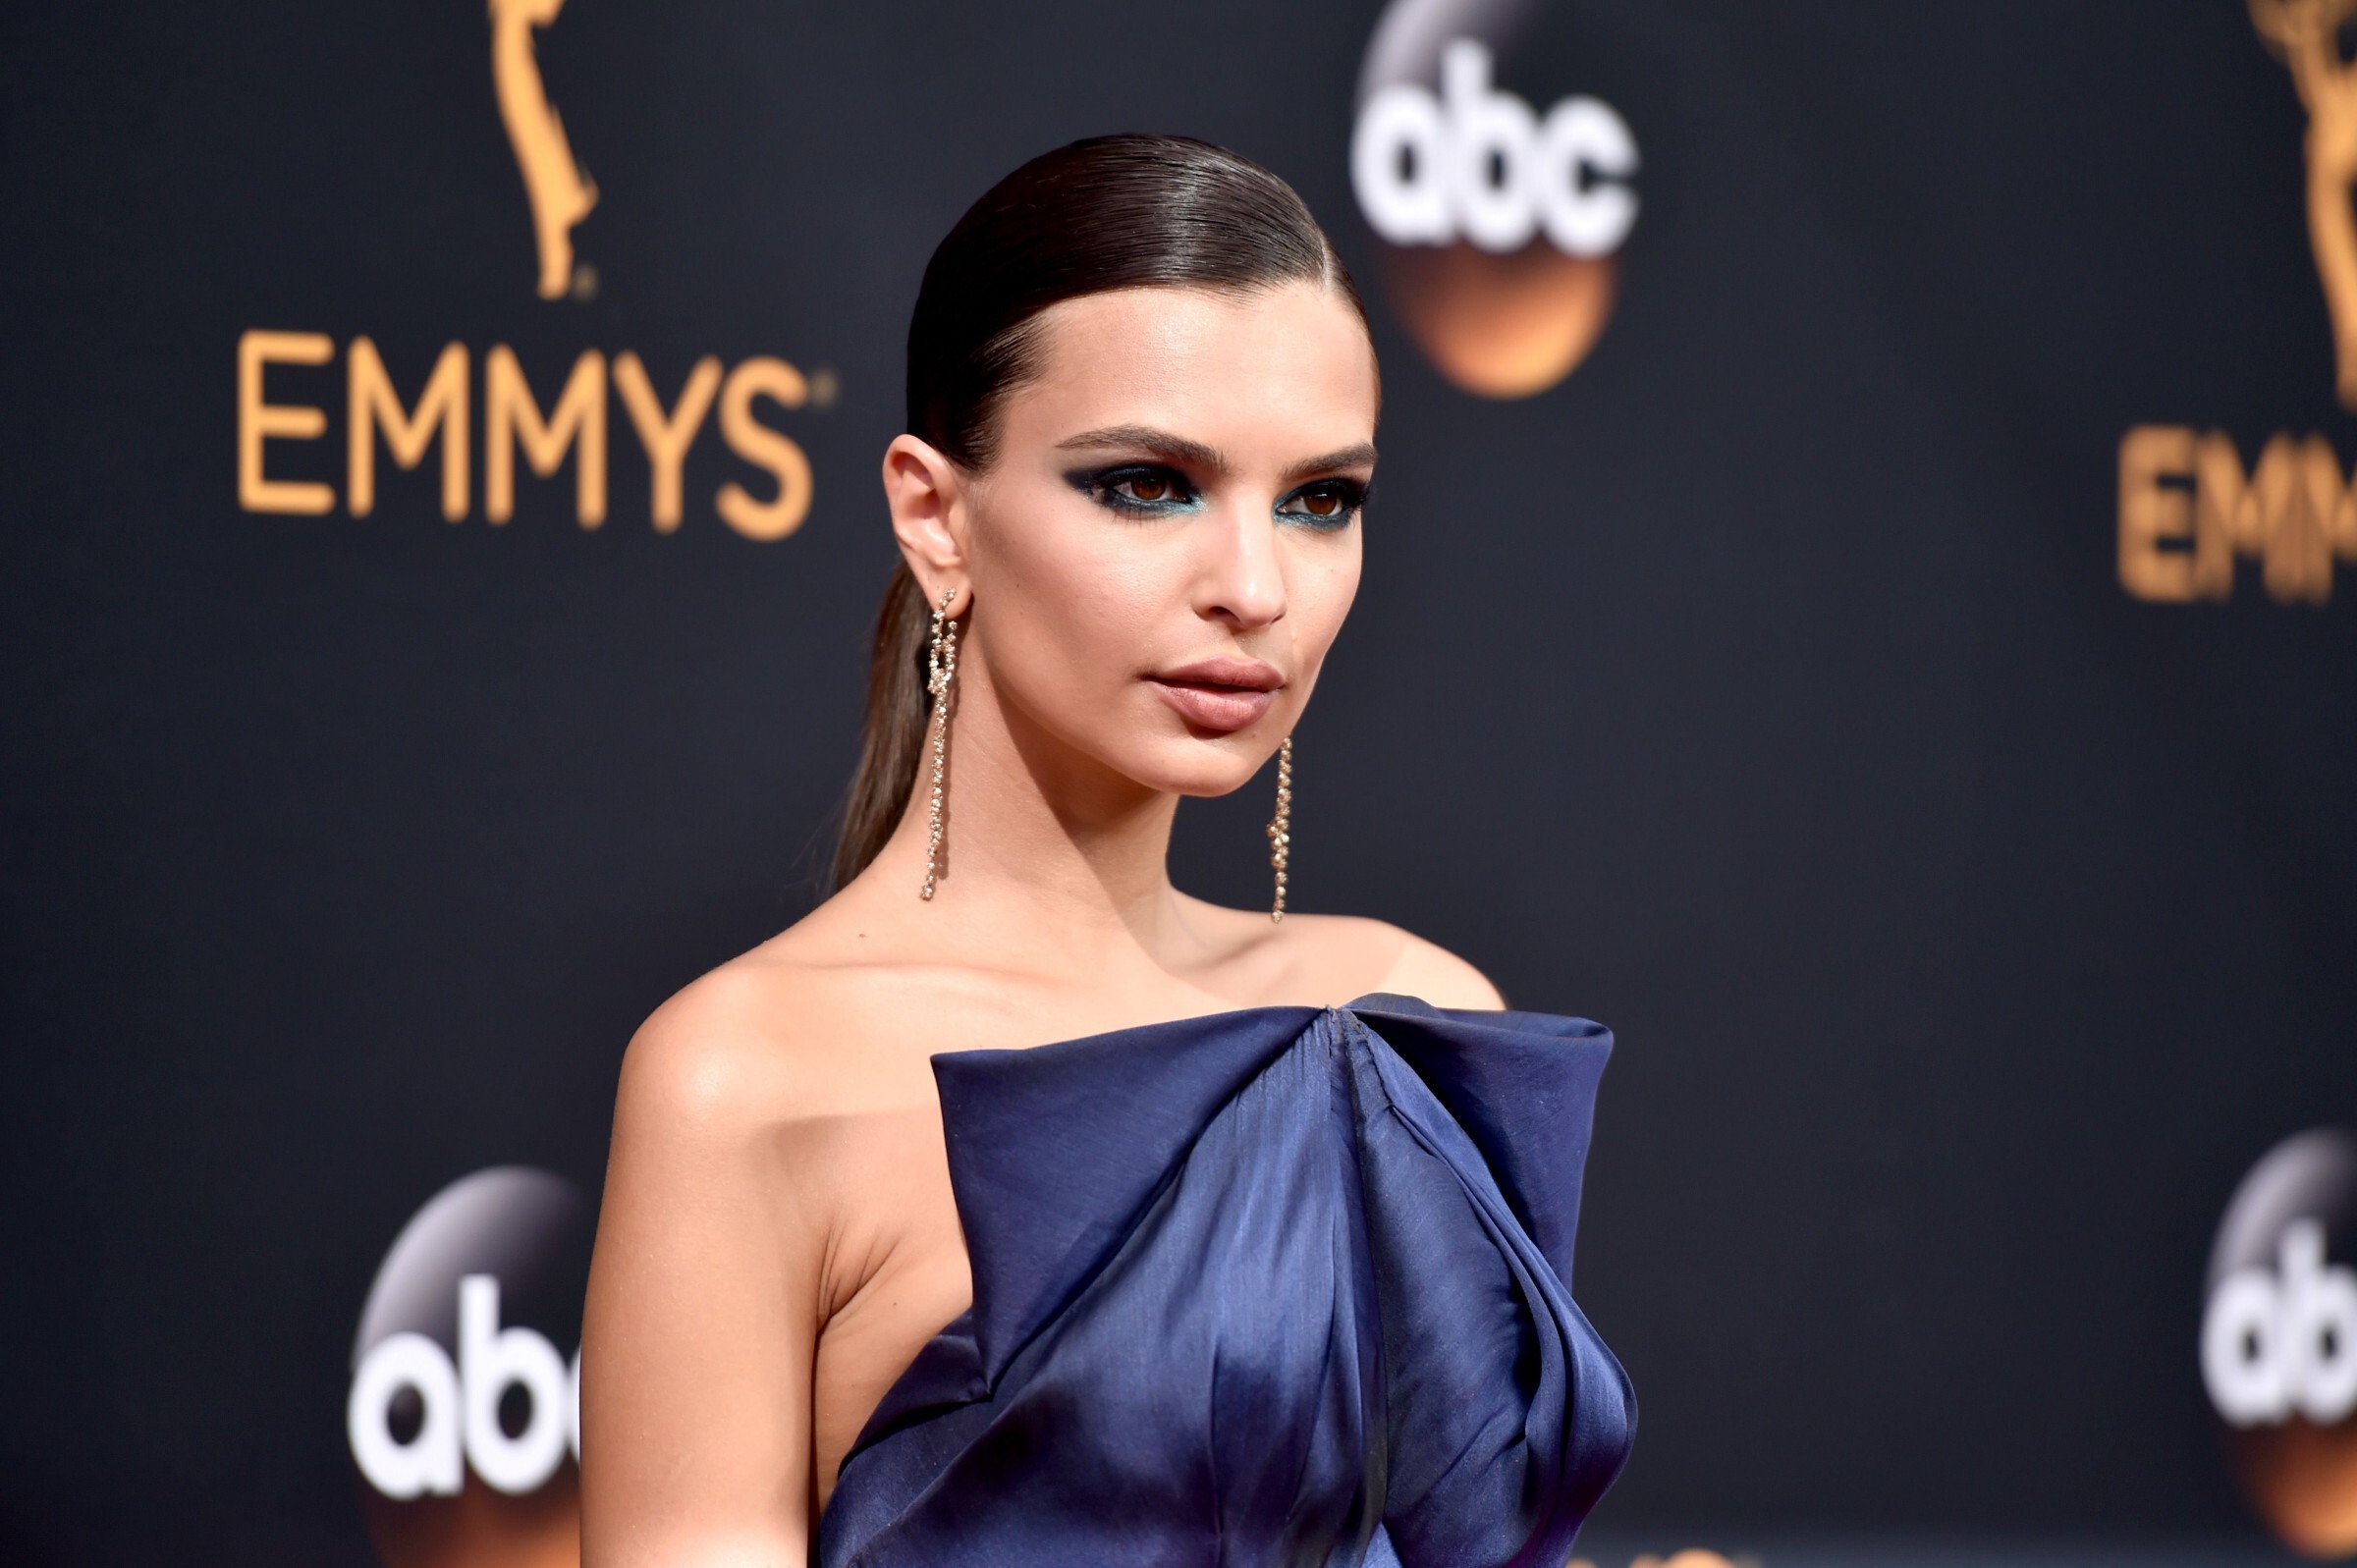 Model & actor Emily Ratajkowski recently went on Instagram and accused photographer Jonathan Leder of assault. Let's find out more.